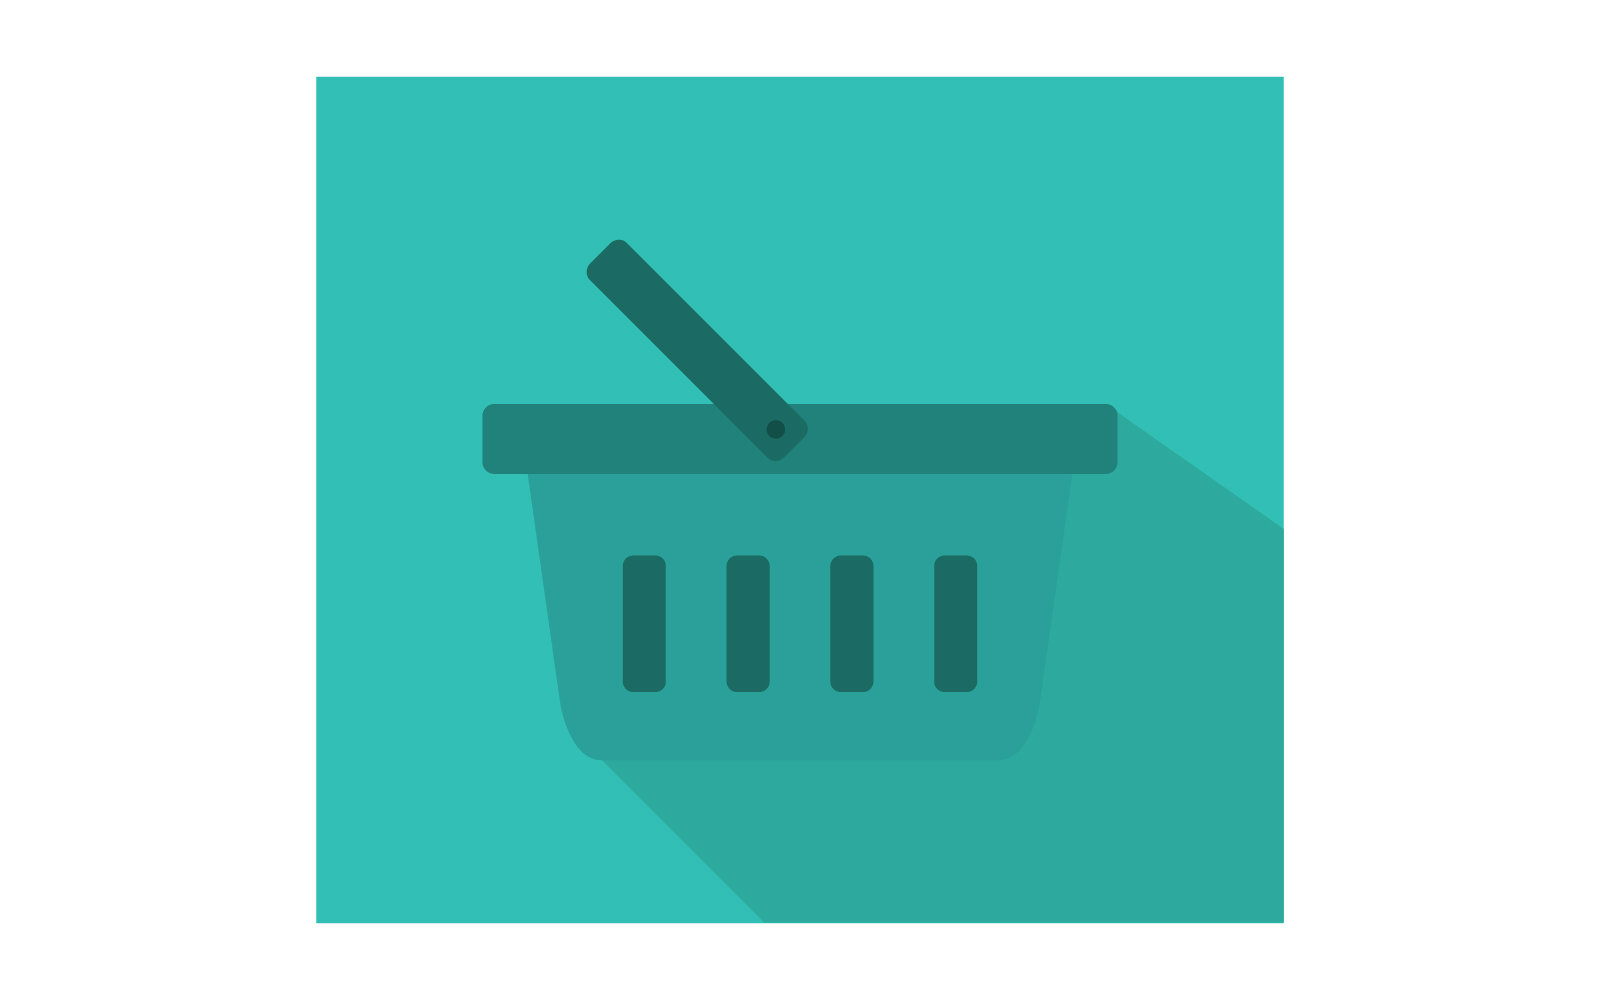 Shopping basket illustrated in vector and colored on a background